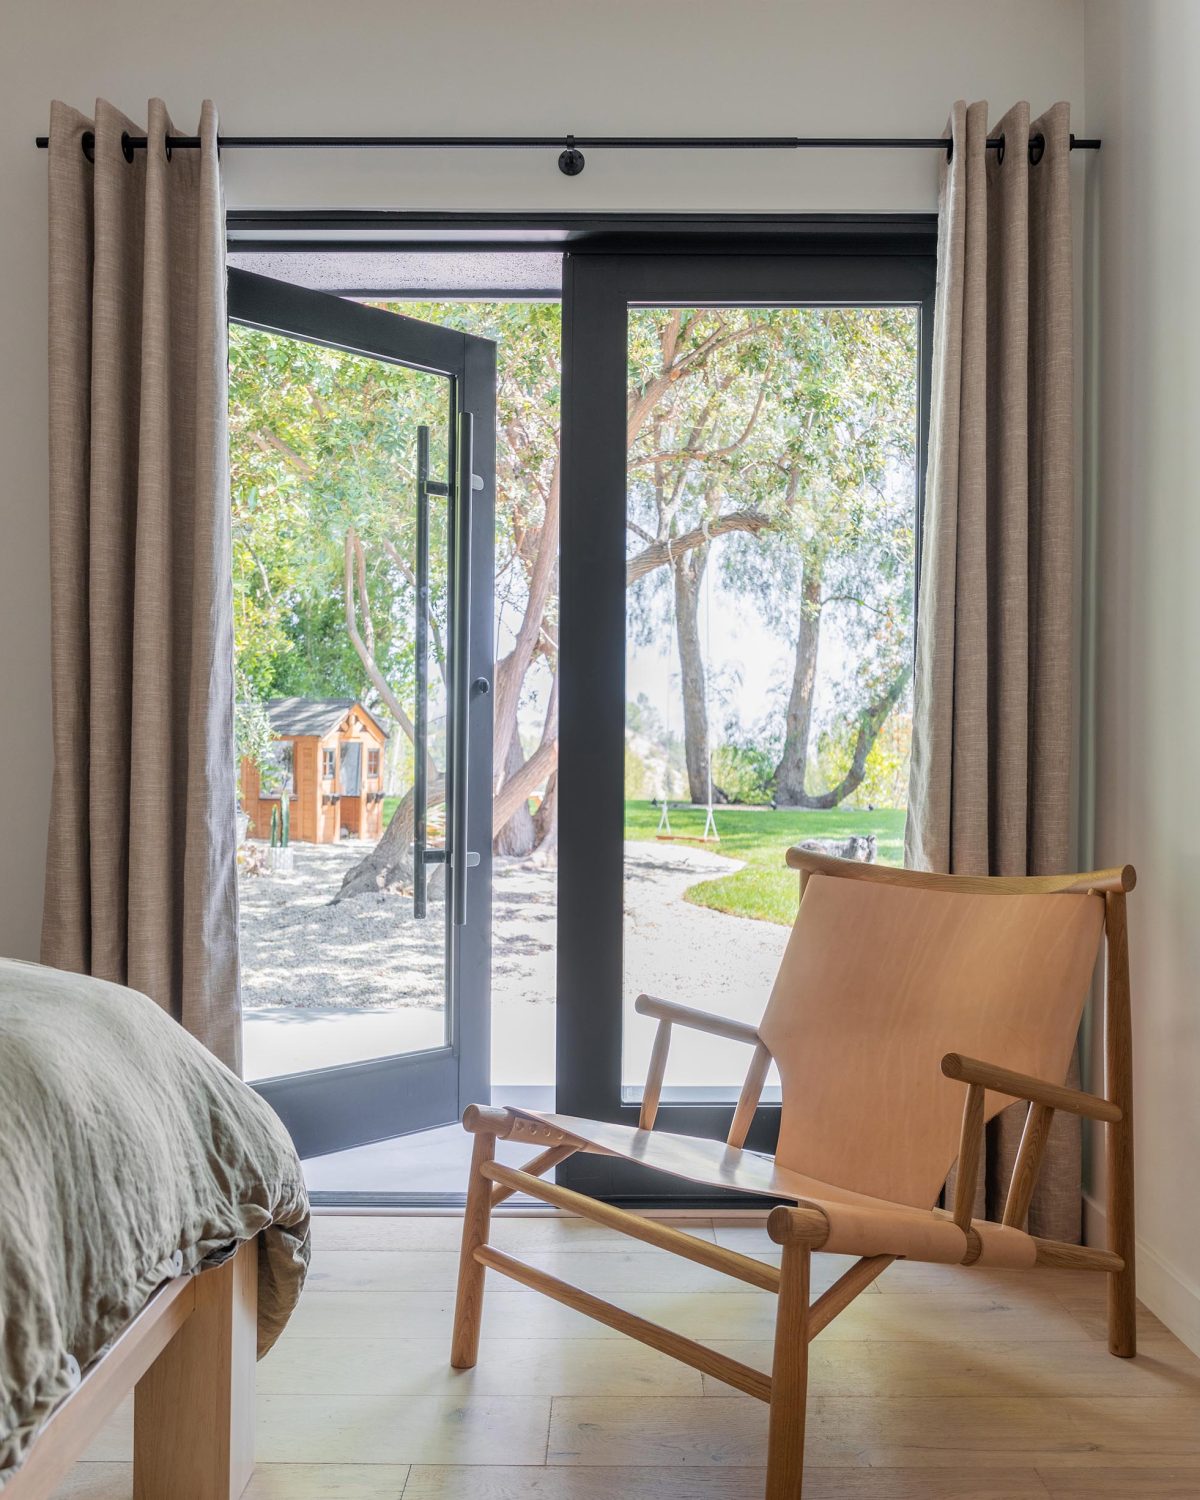 A massive, hinged door opens this bedroom to a pathway.